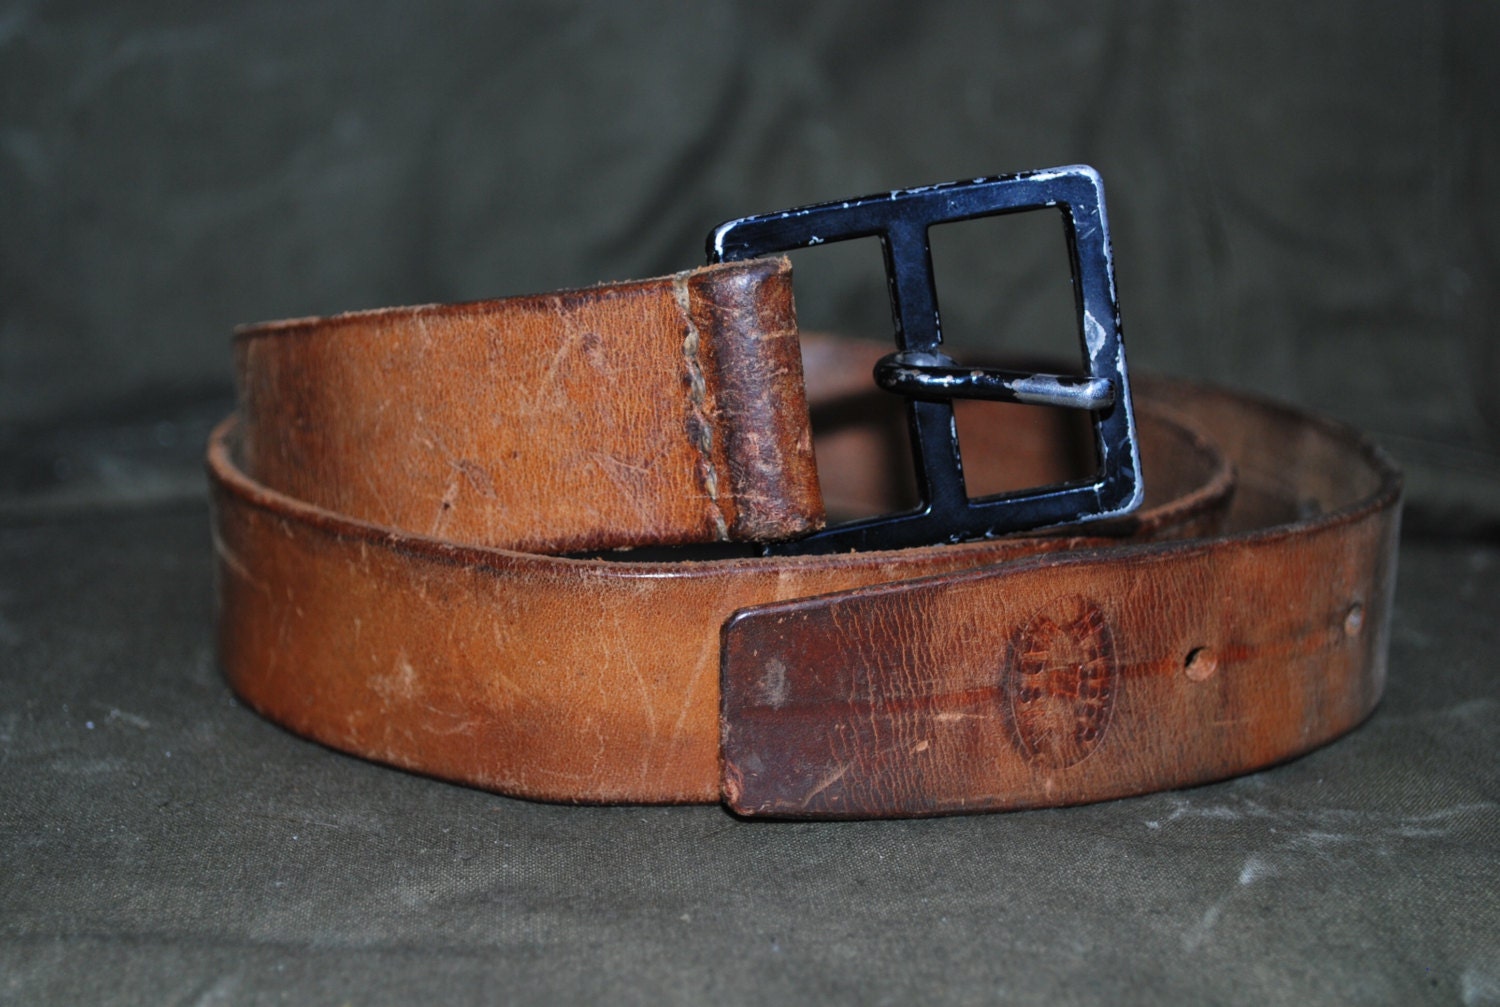 What is your favorite belt? | Page 3 | Expedition Portal